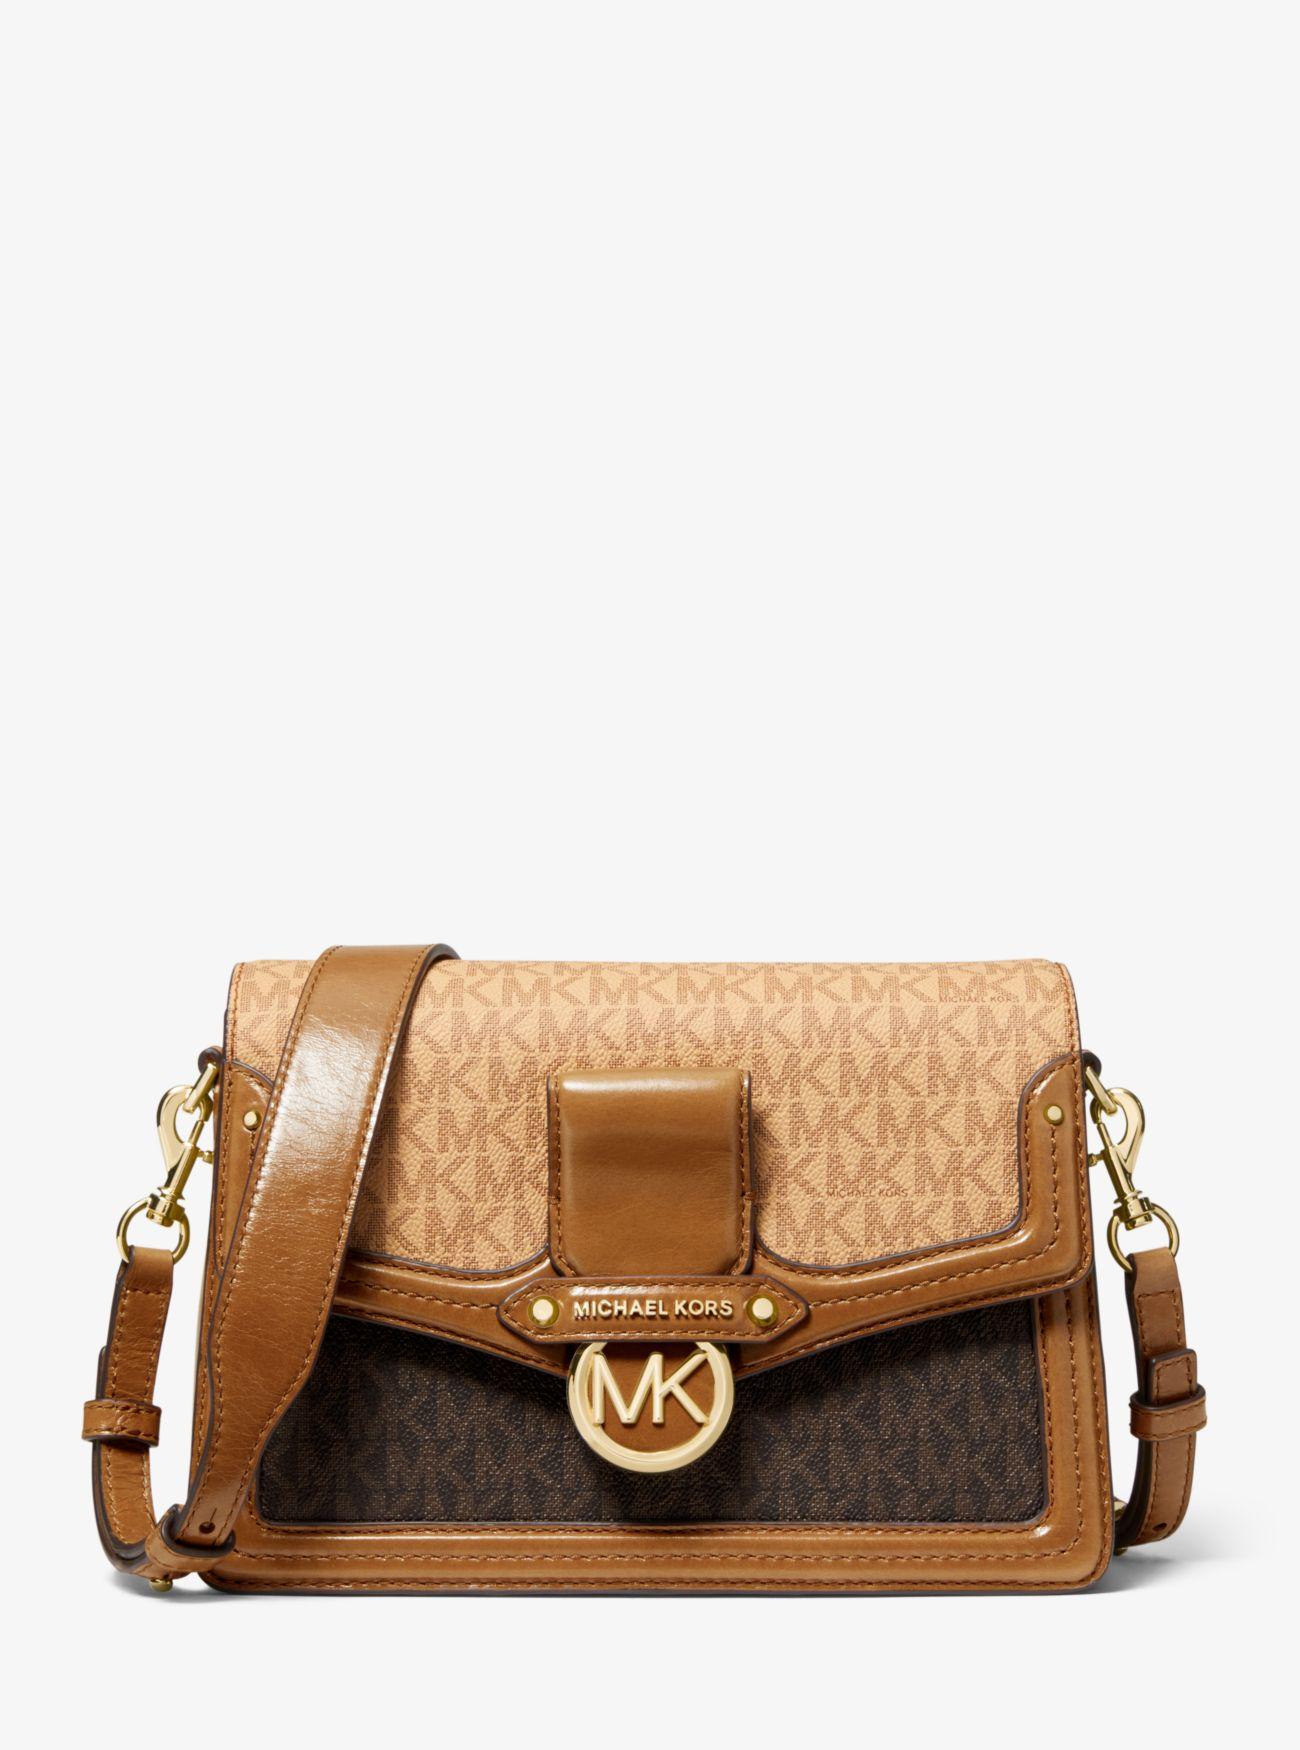 Michael Kors Jessie Medium Two-tone Logo And Leather Shoulder Bag in ...